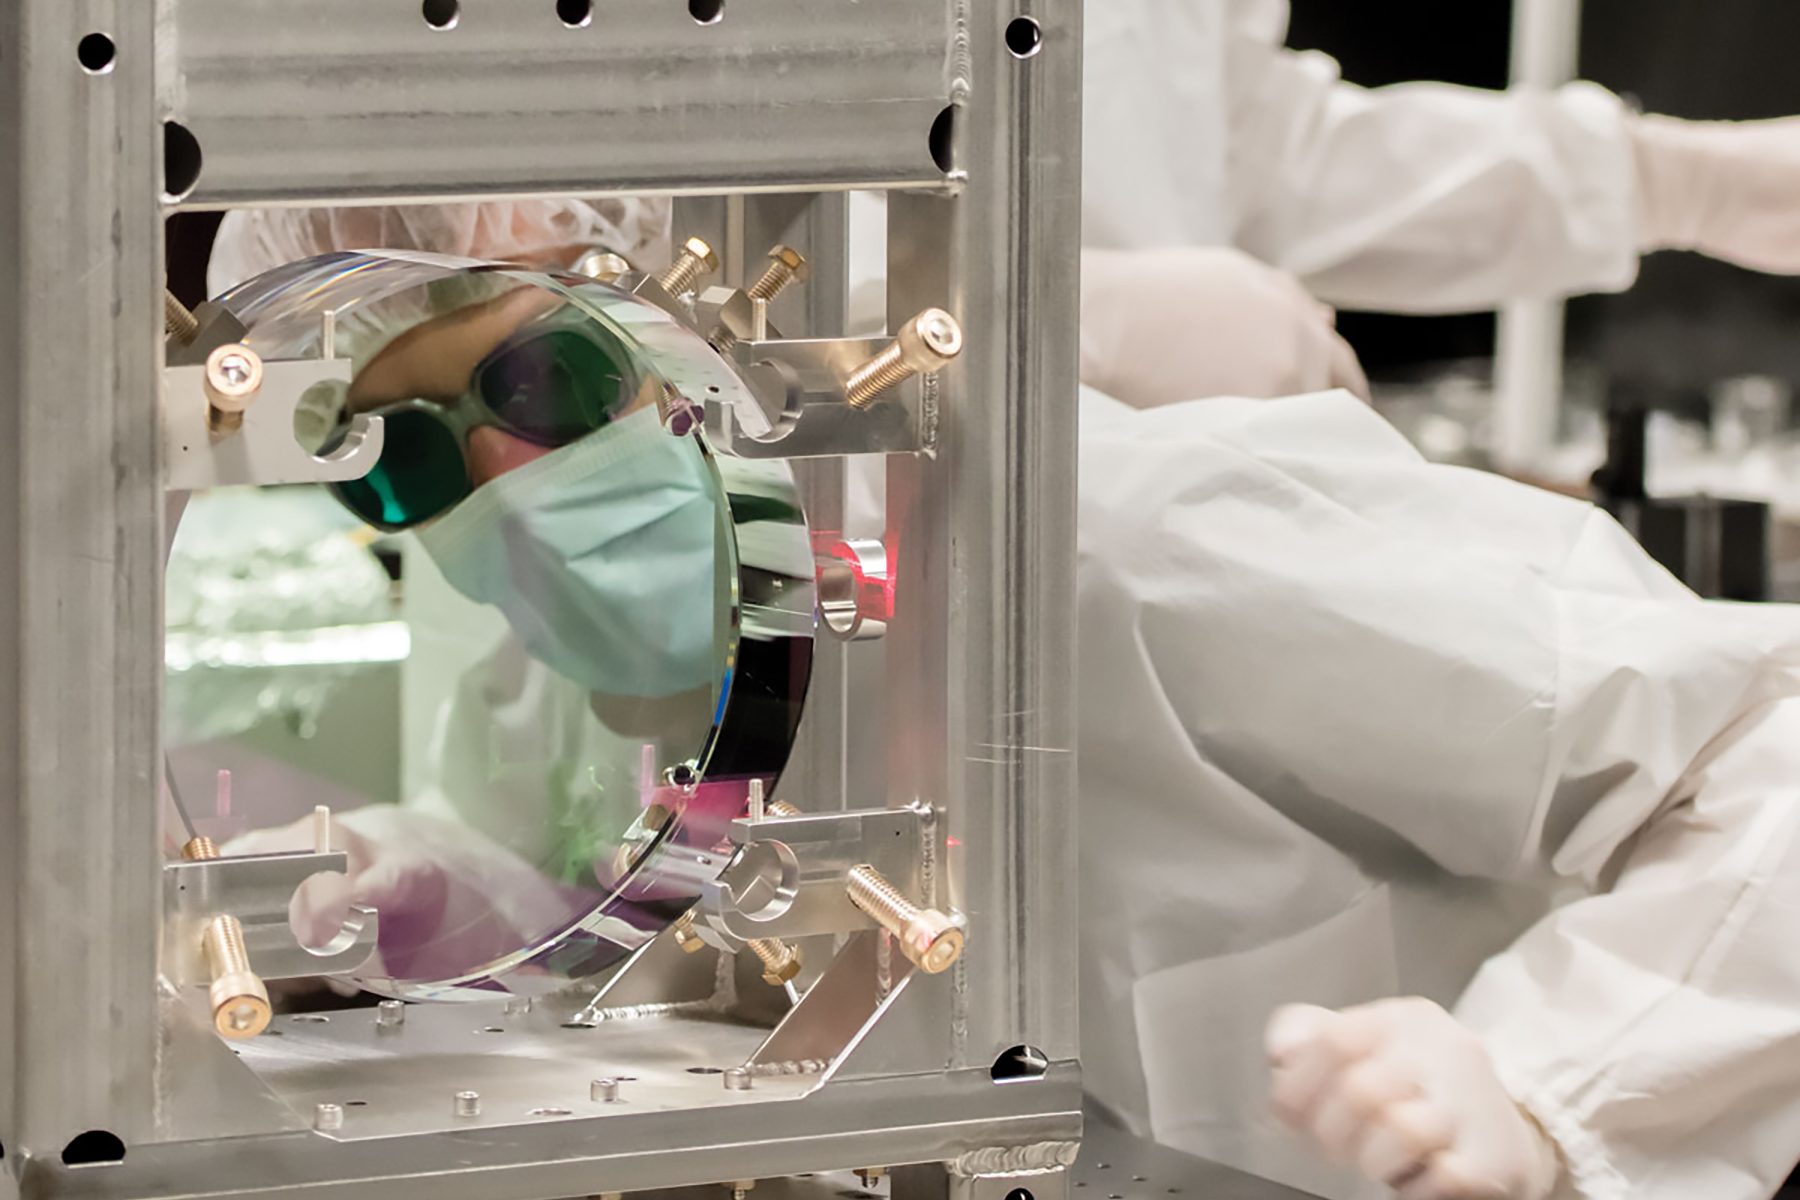 UF physics researchers continue to improve optics for future detectors in the department's clean room.